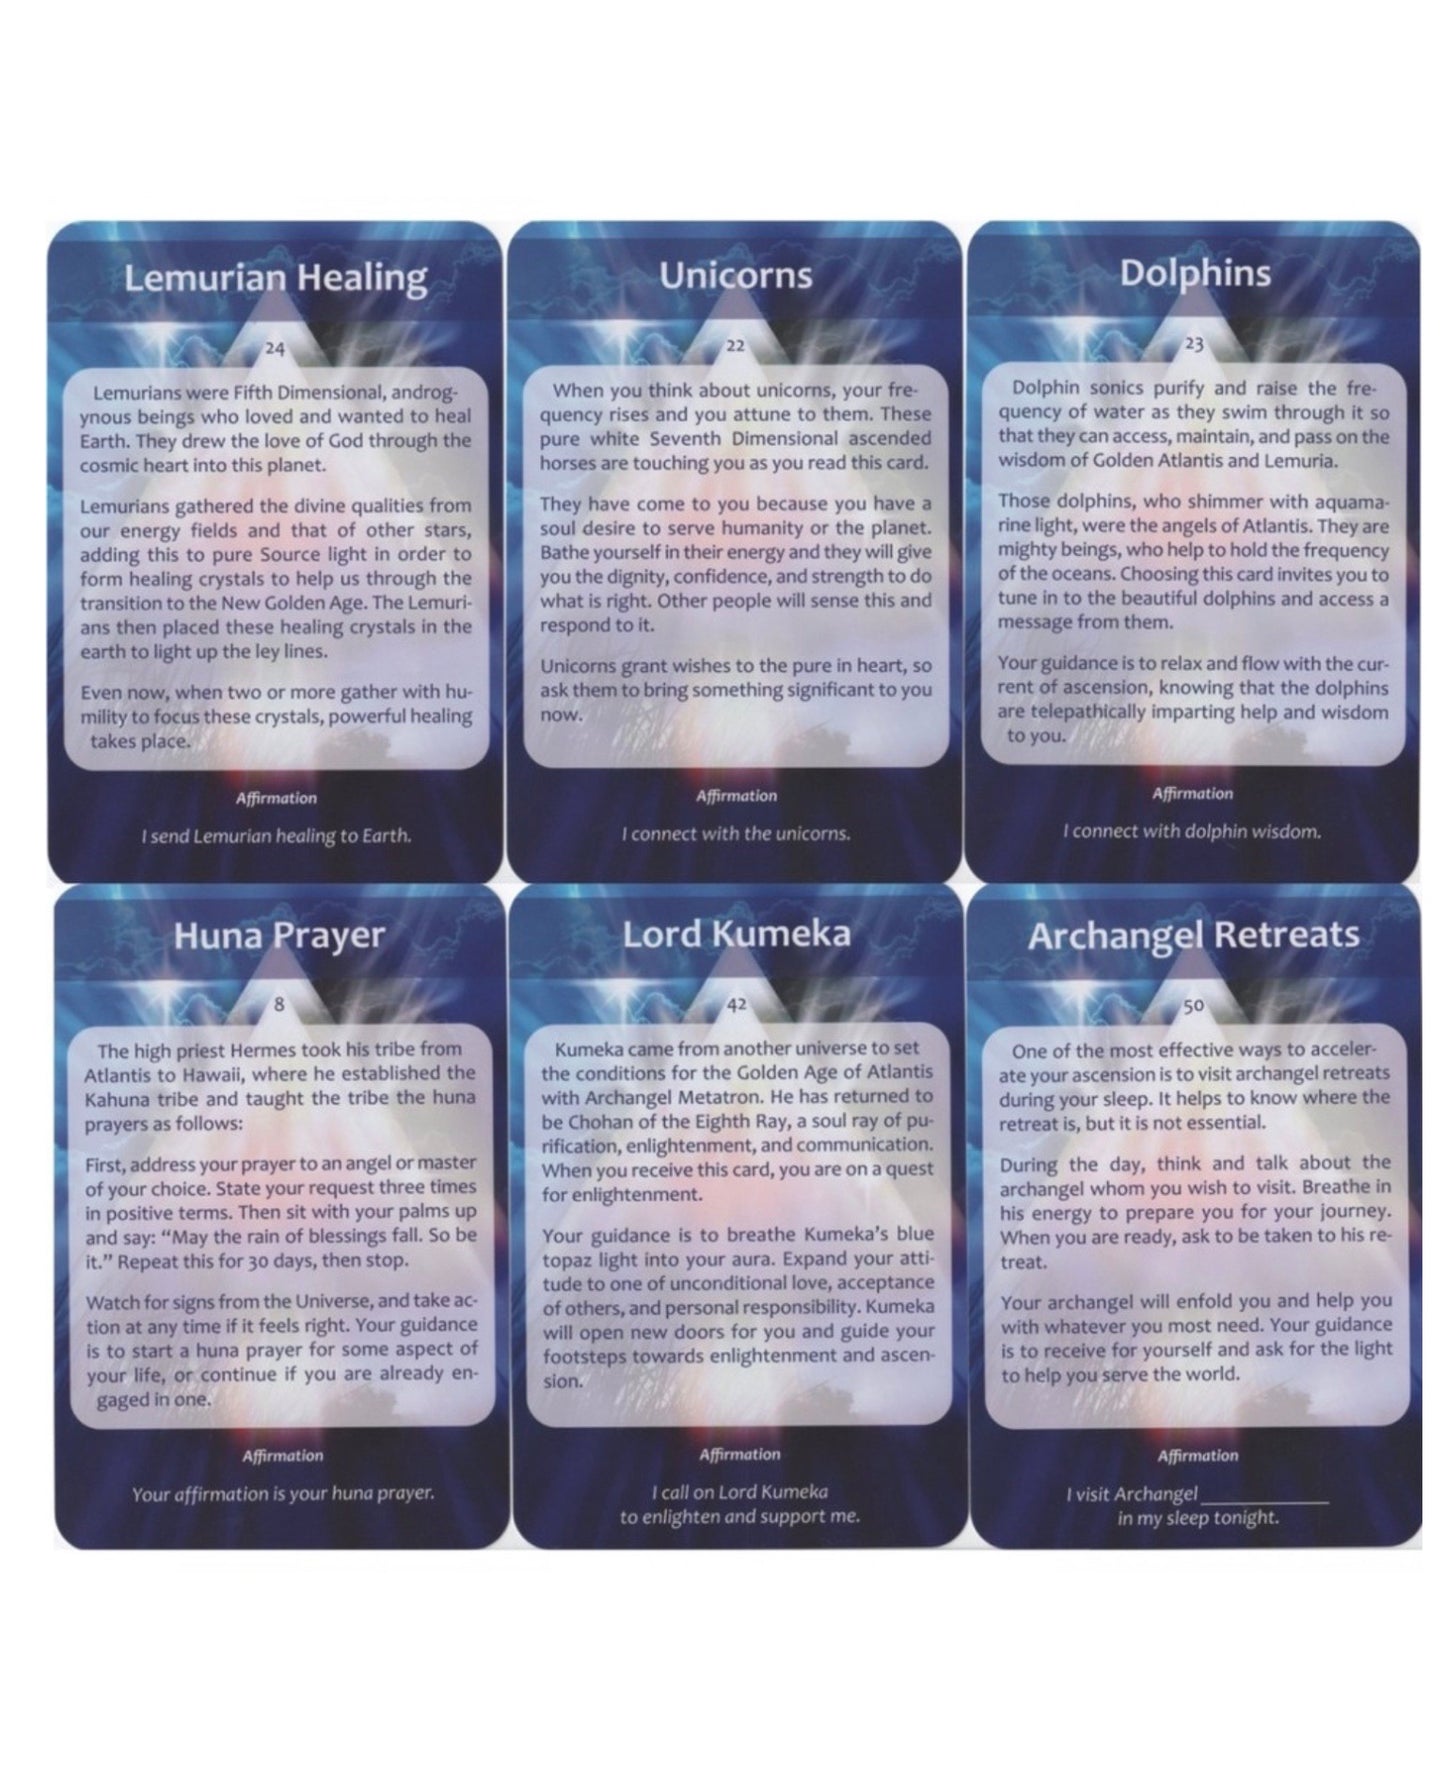 Ascension Cards: Accelerate Your Journey to the Light